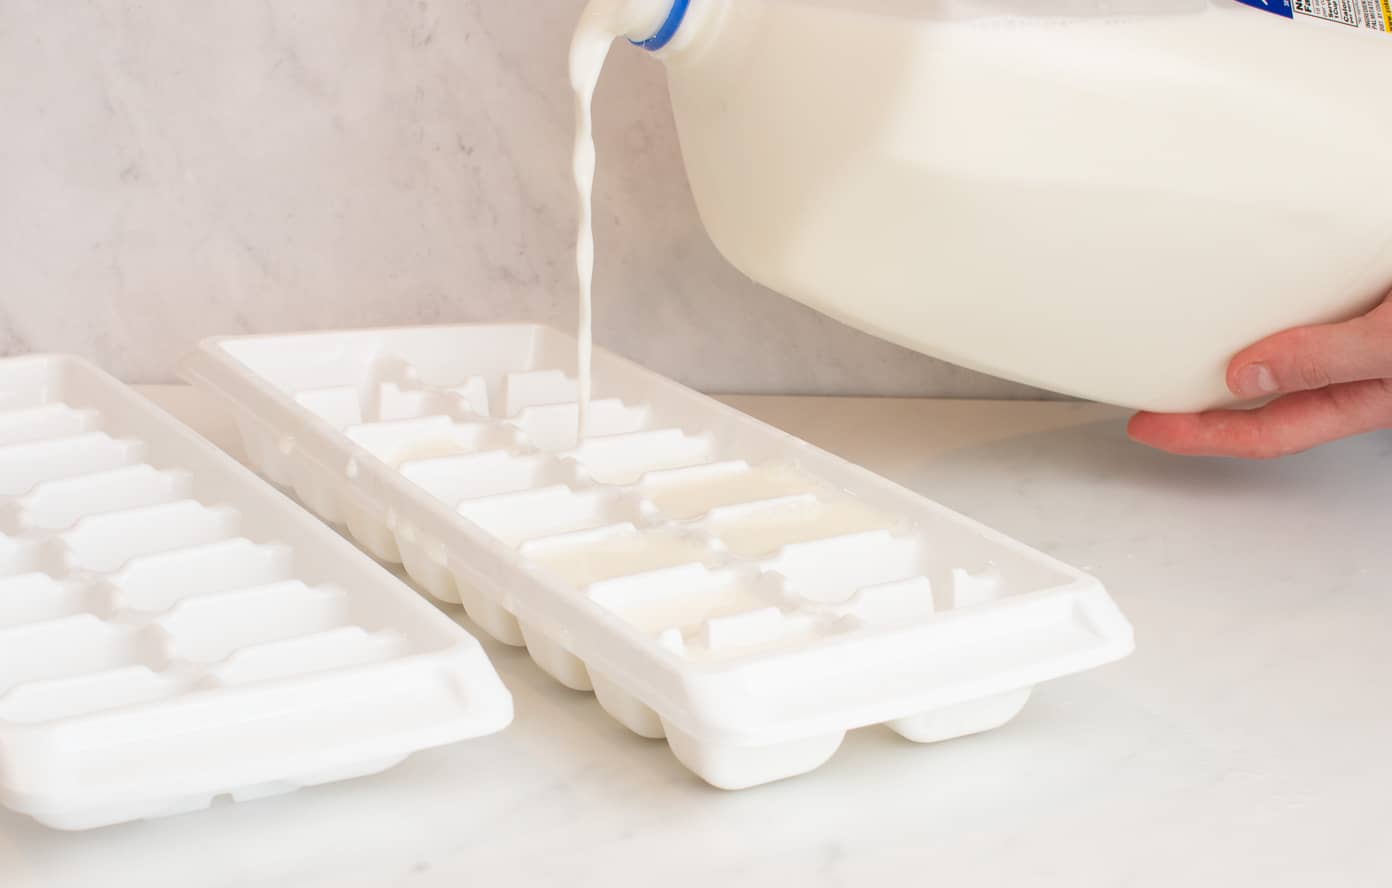 Two white ice cube trays on the white counter being filled with a gallon of milk and a hand holding it.